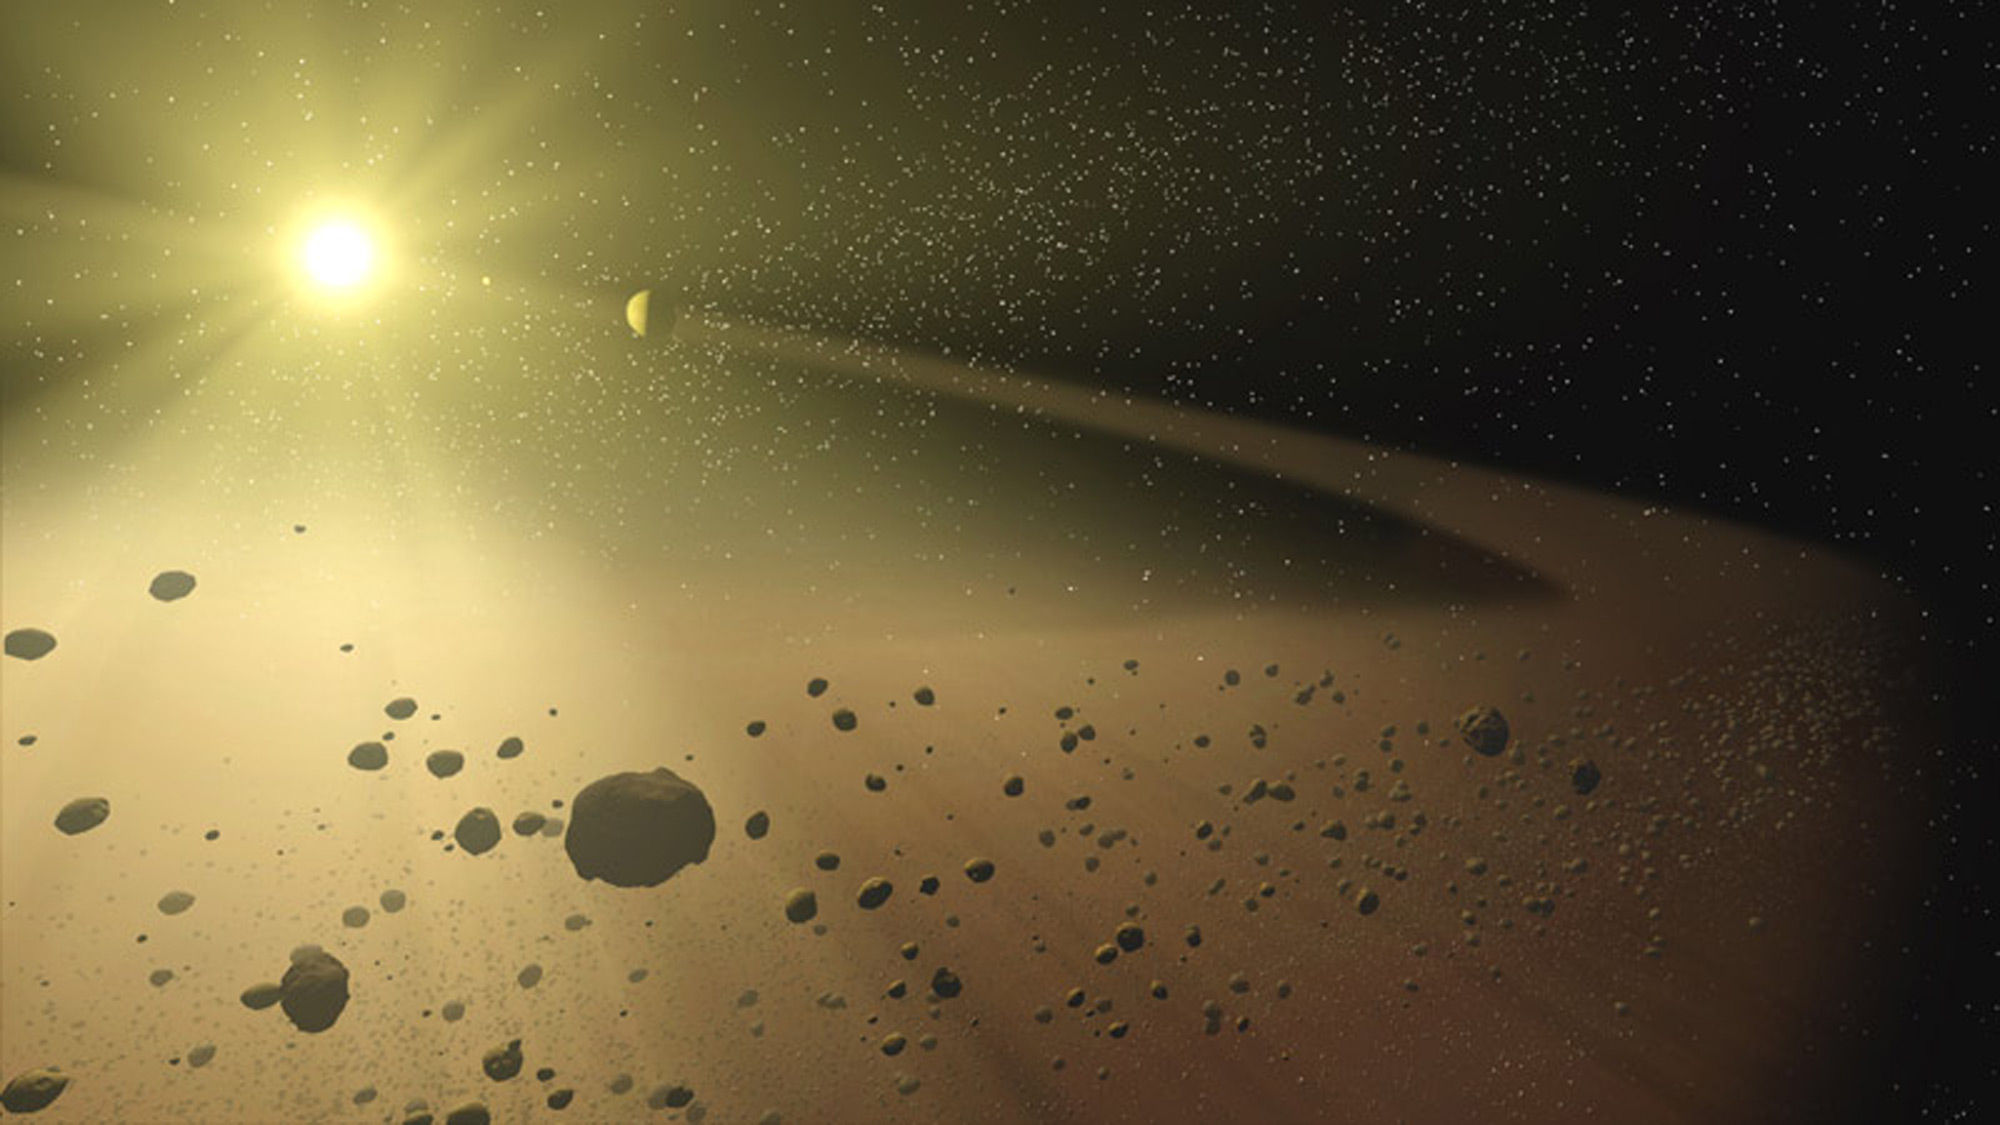 You shouldn’t be too worried about the huge asteroid that’s about to fly right past us